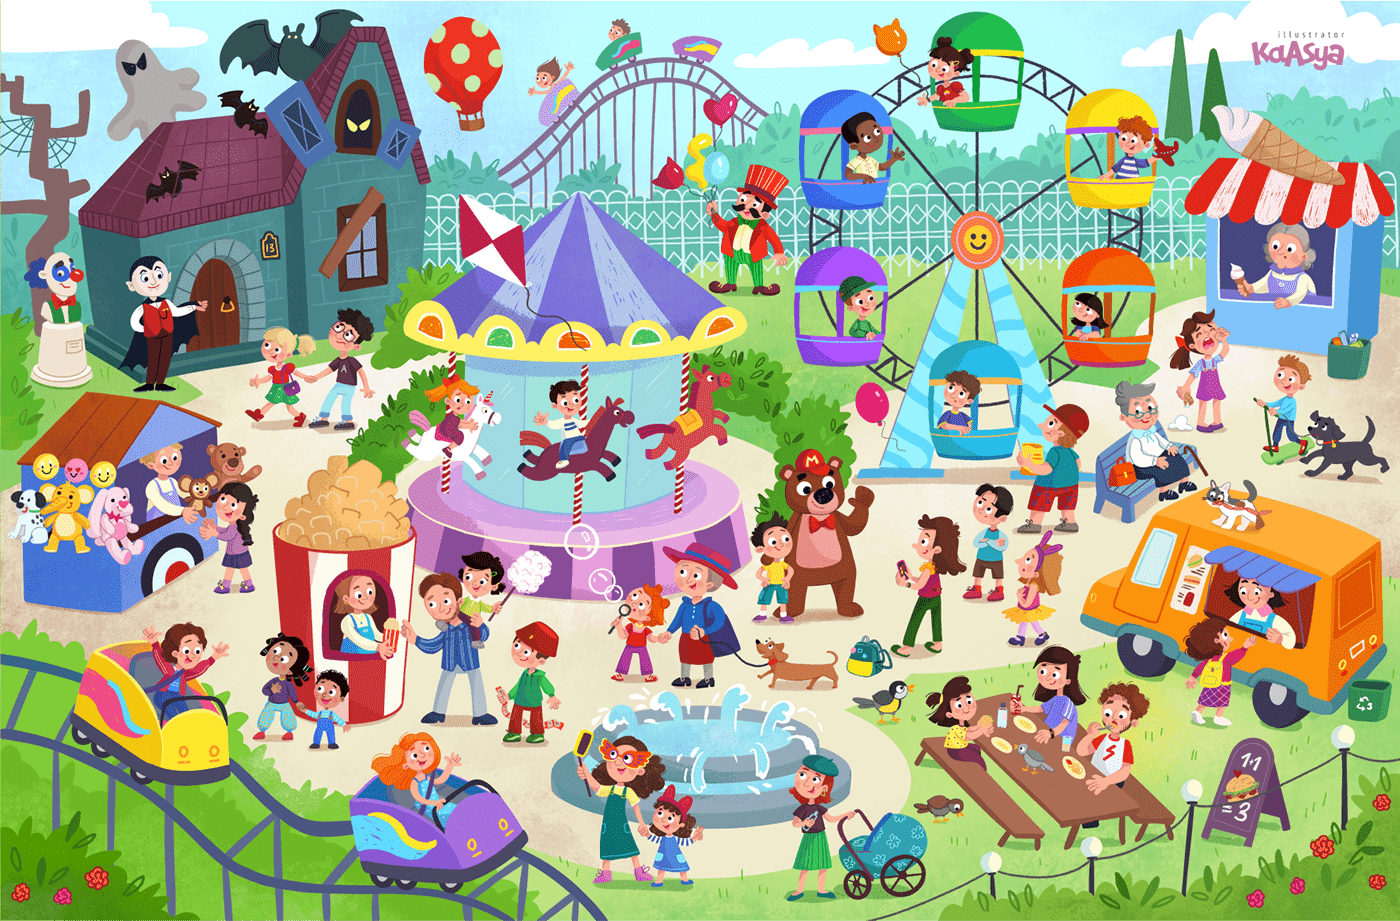 amusement park animals illustration Character design  children illustration kids illustration puzzle Space  Wimmelbuch виммельух пазлы